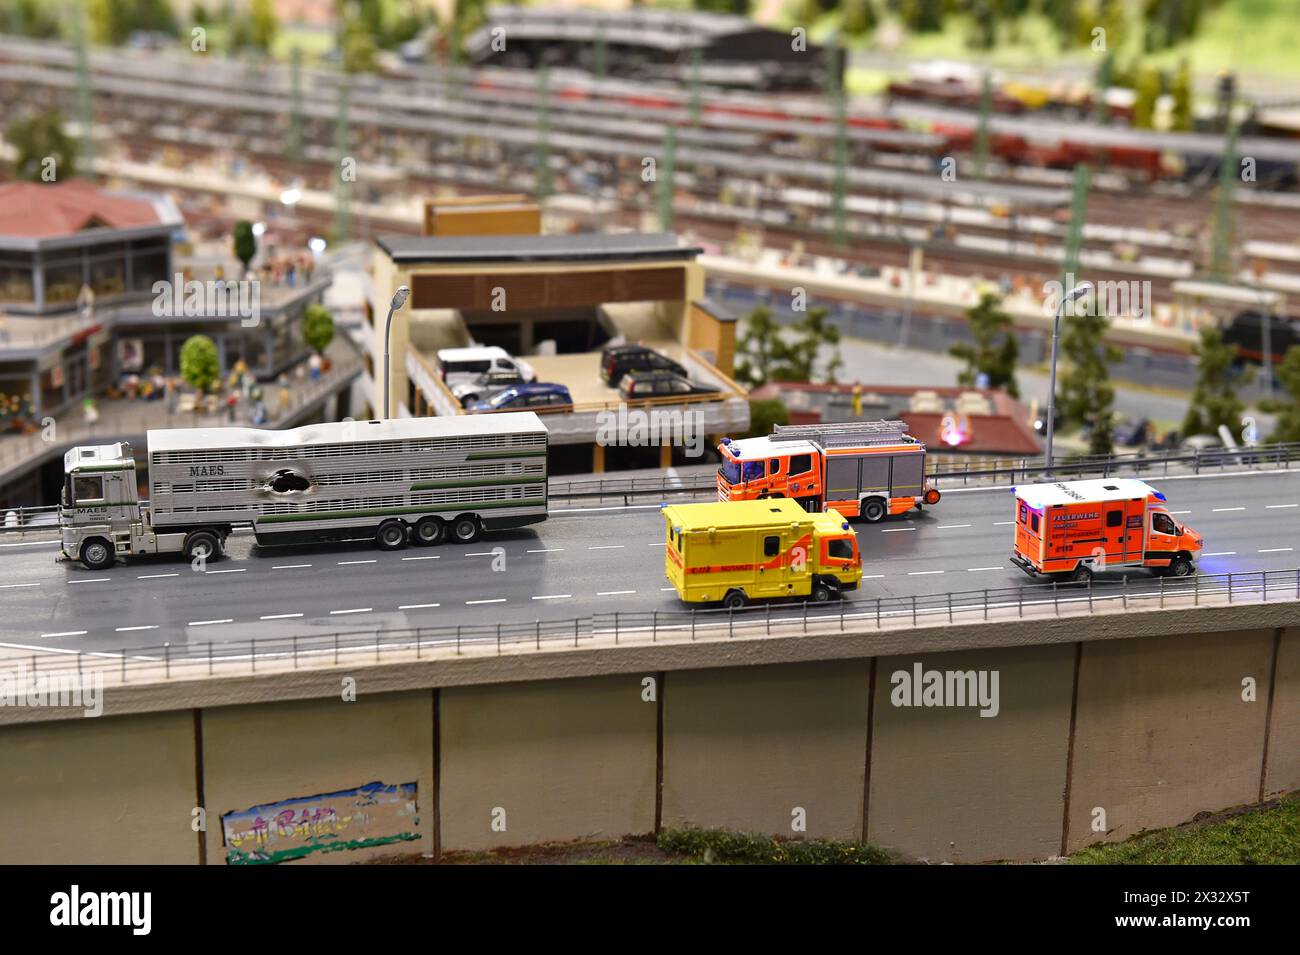 Truck Fire And Fire Department At Miniatur Wunderland Hamburg Stock Photo